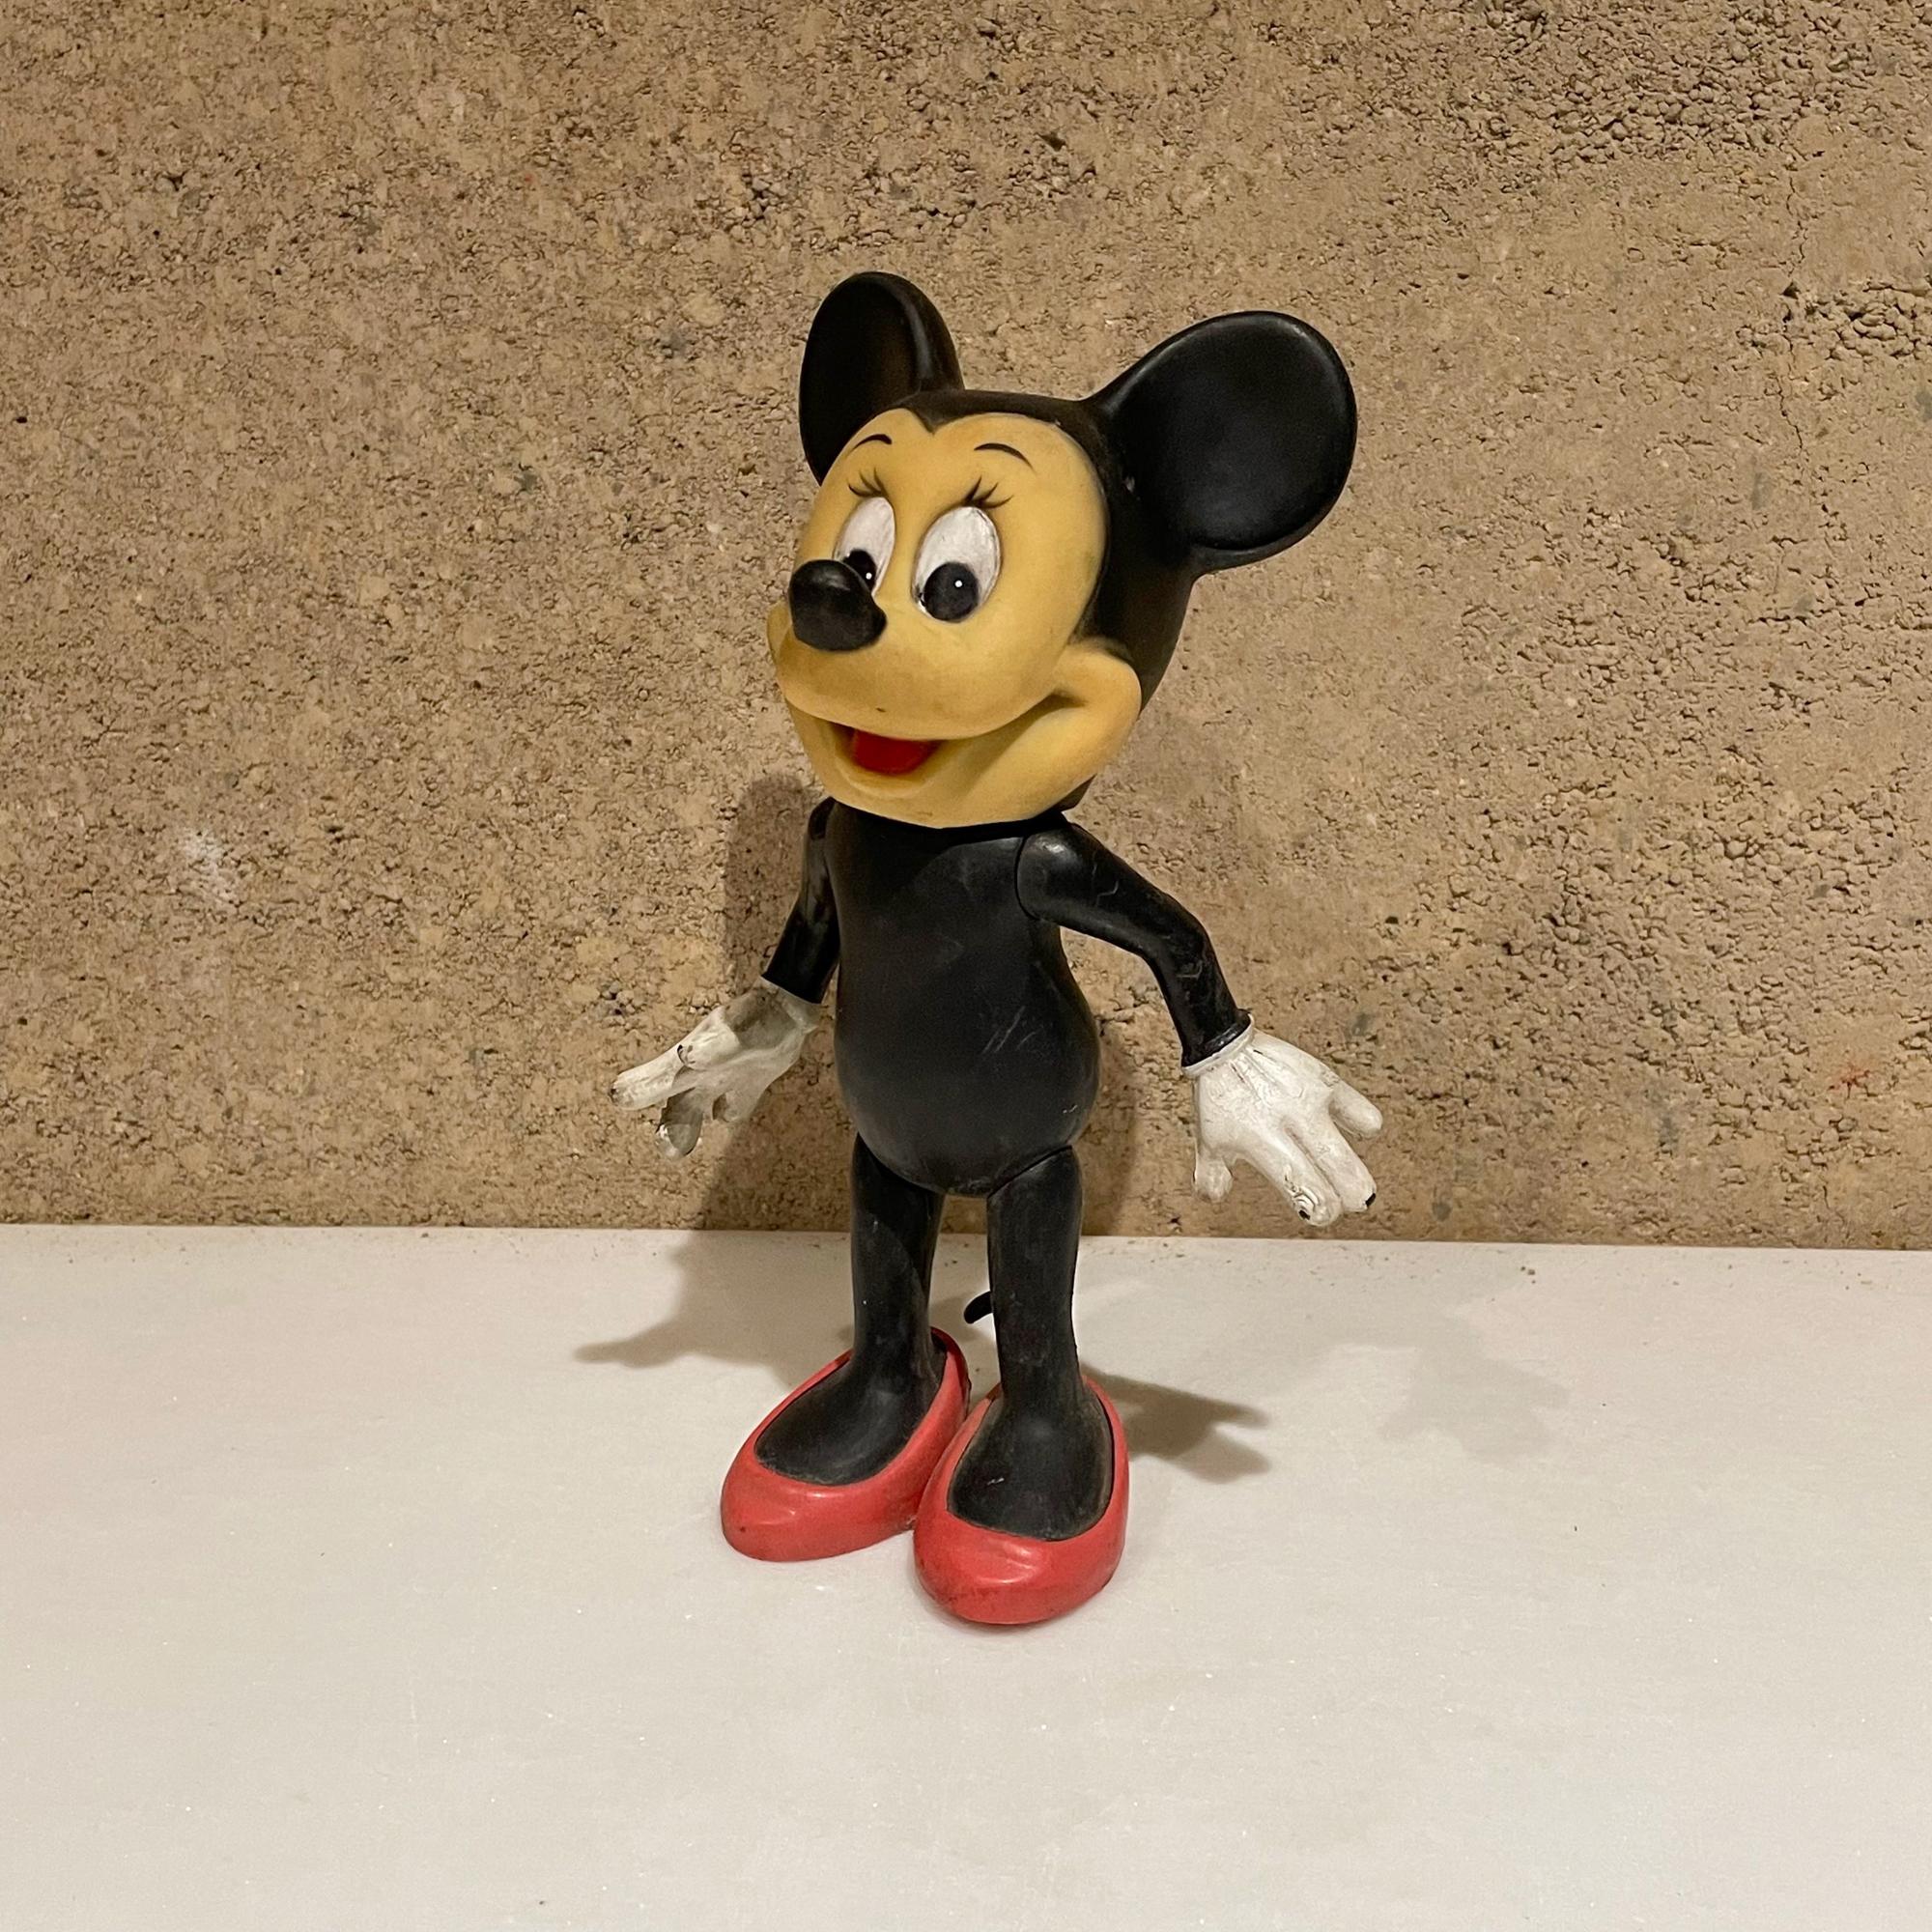 Minnie mouse
Adorable vintage minnie mouse doll figure by Walt Disney R Dakin & Co Hong Kong 1960s
Maker stamped
Original preowned unrestored vintage condition.
Measures: 7.5 H x 5 W x 3.5 D inches
Refer to images.
  

 
 